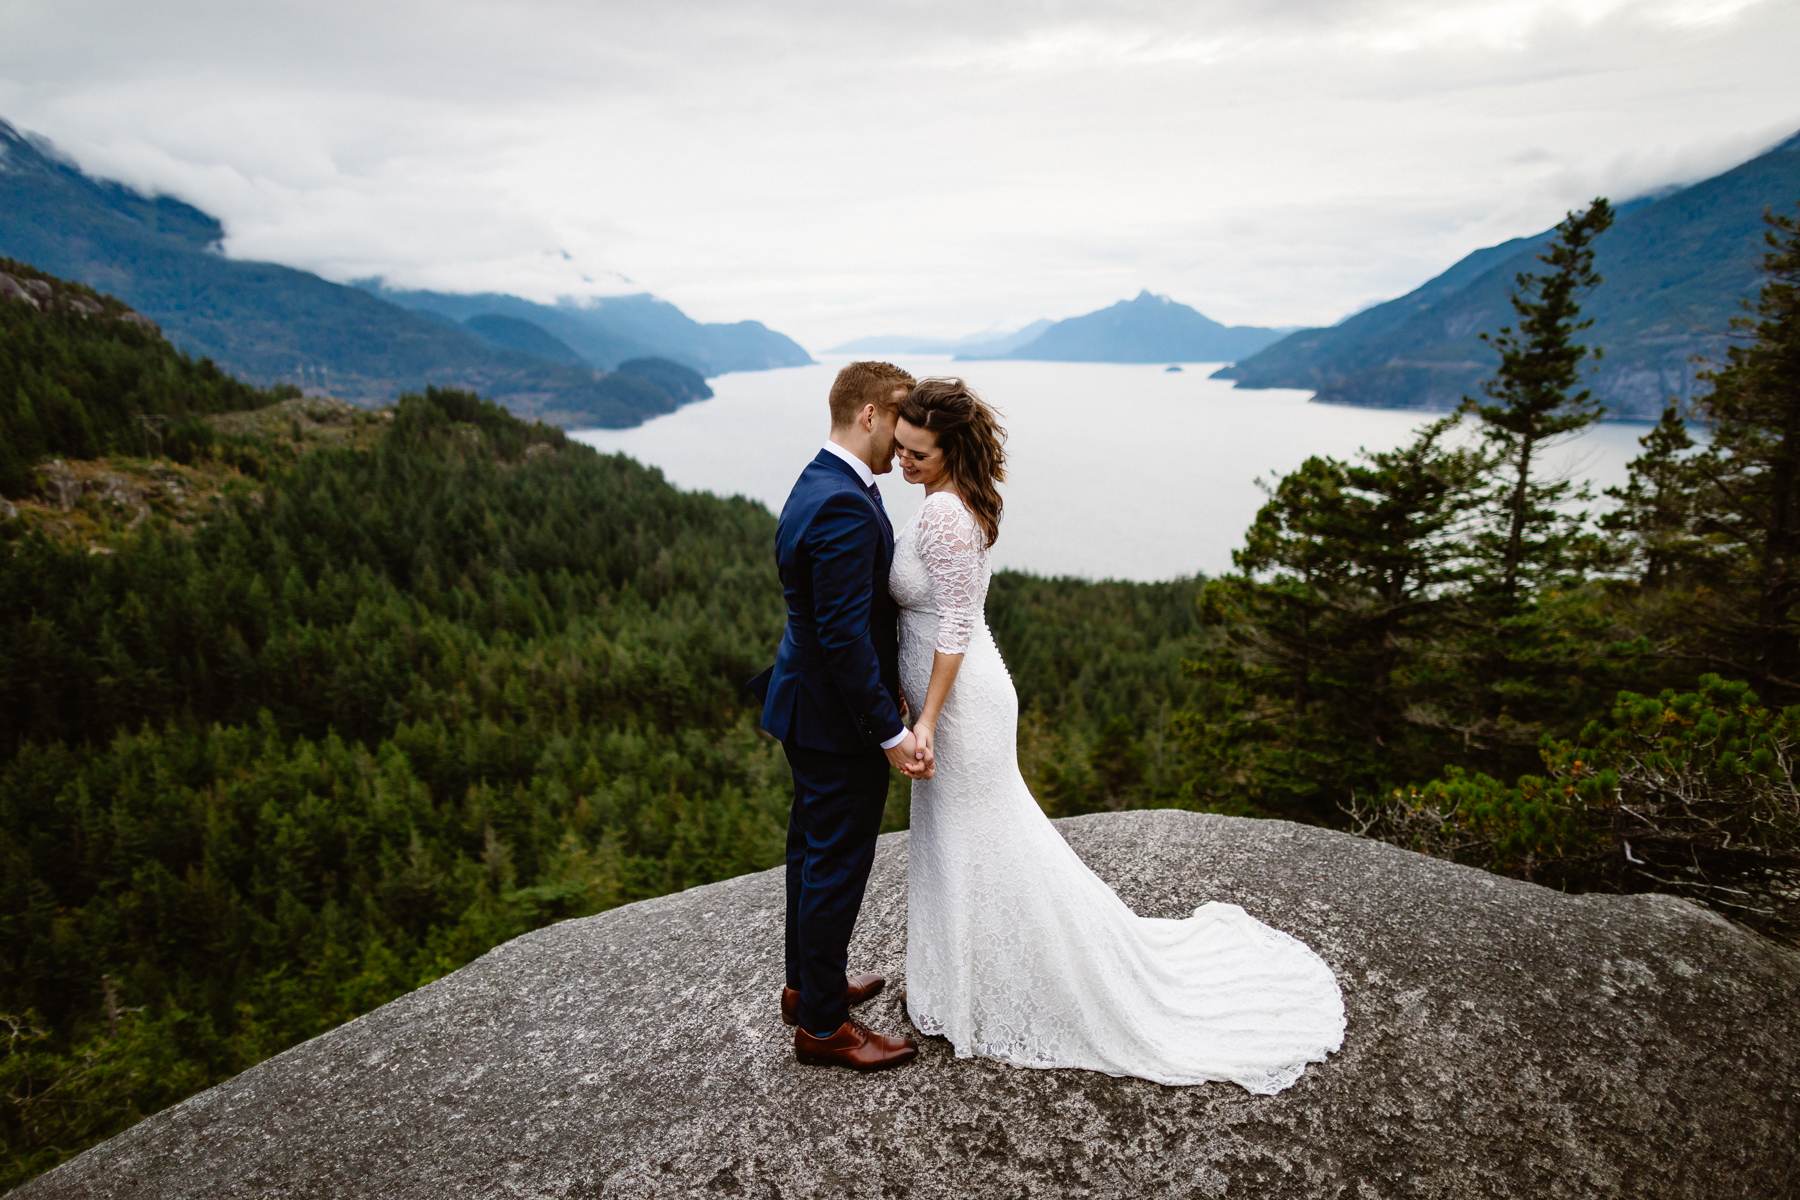 Squamish wedding photographers for an adventurous elopement overlooking Howe Sound